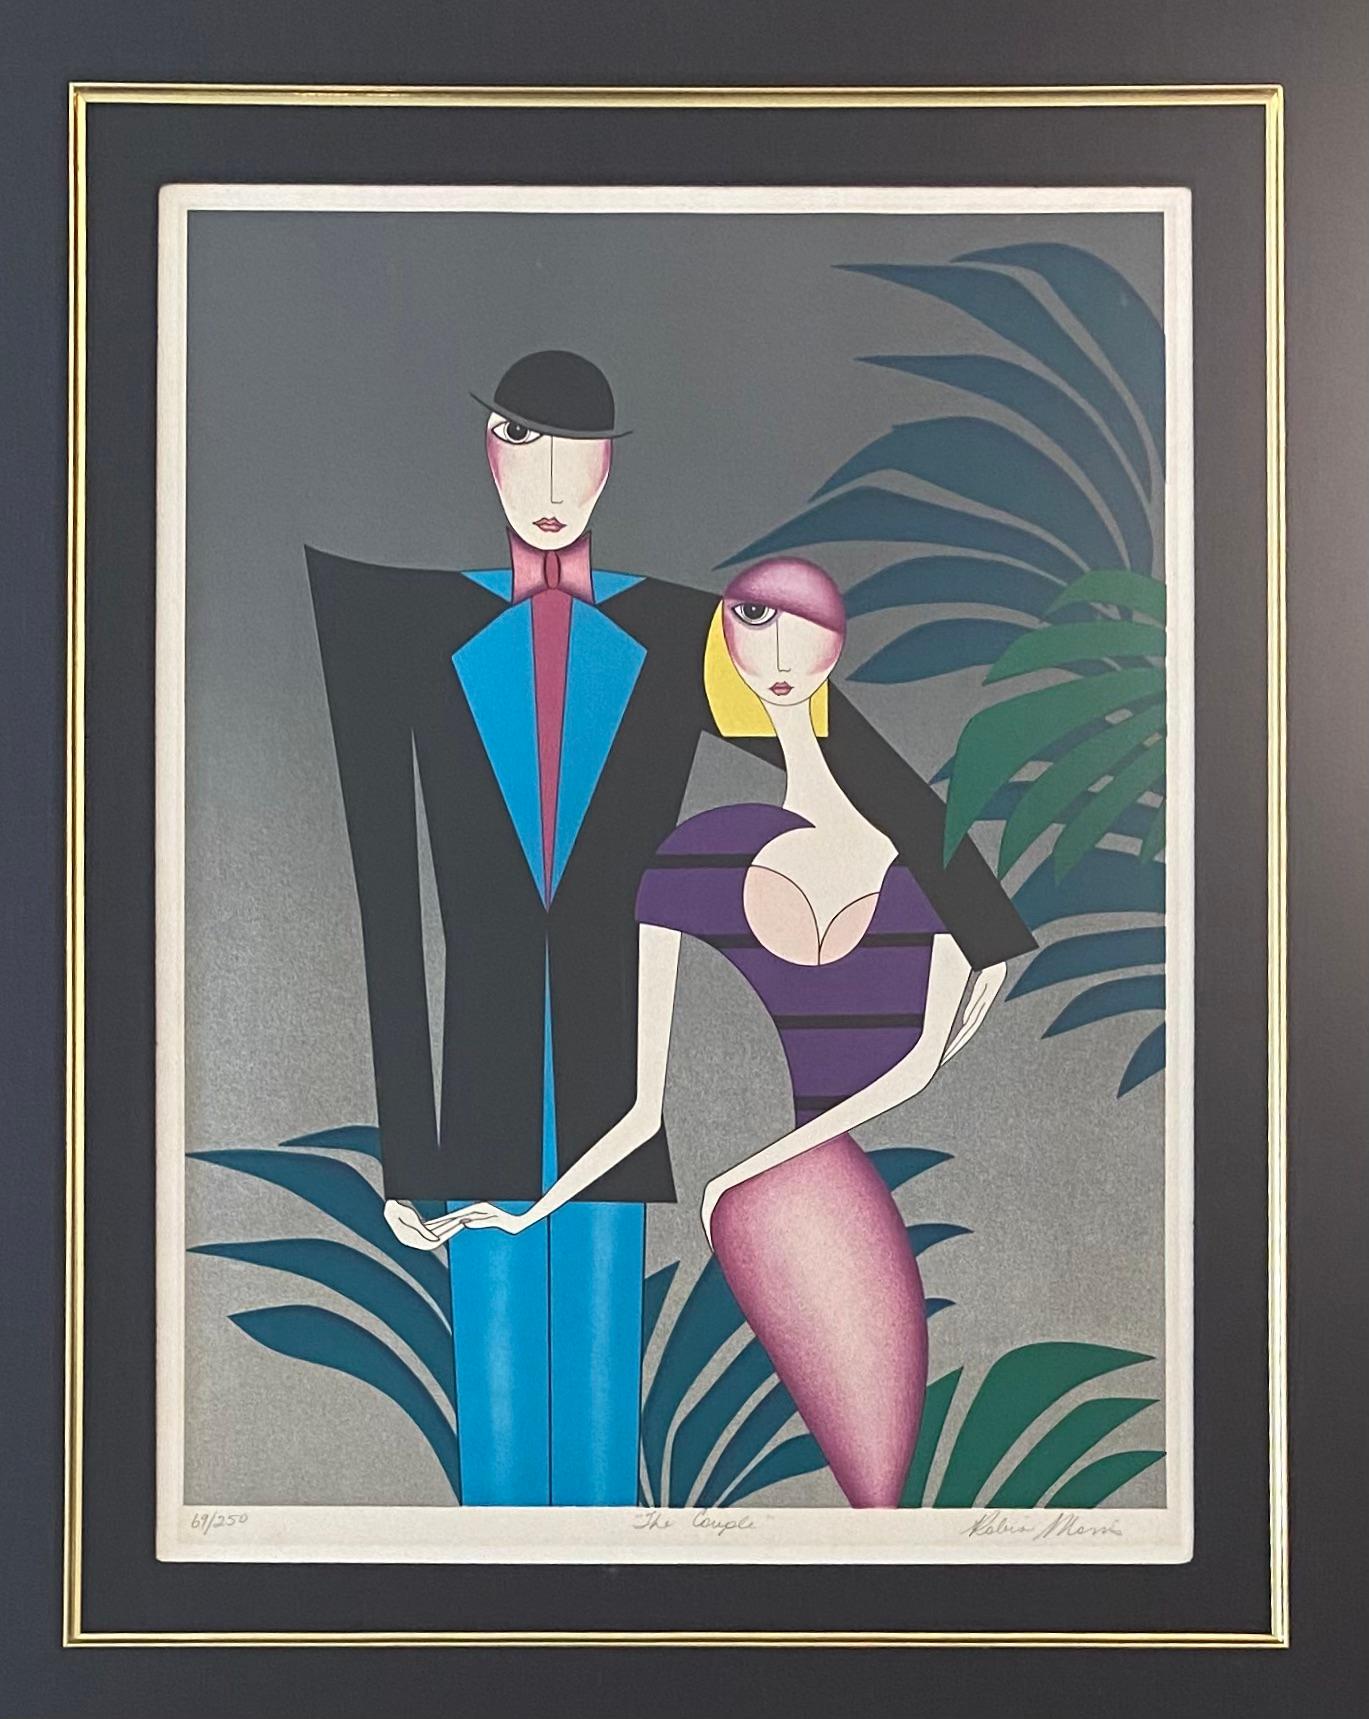 A fine color lithograph by American female artist Robin Morris. This is an original hand drawn limited edition lithograph printed using hand lithography techniques on archival Arches paper, 100% acid free. Presented in a very good quality